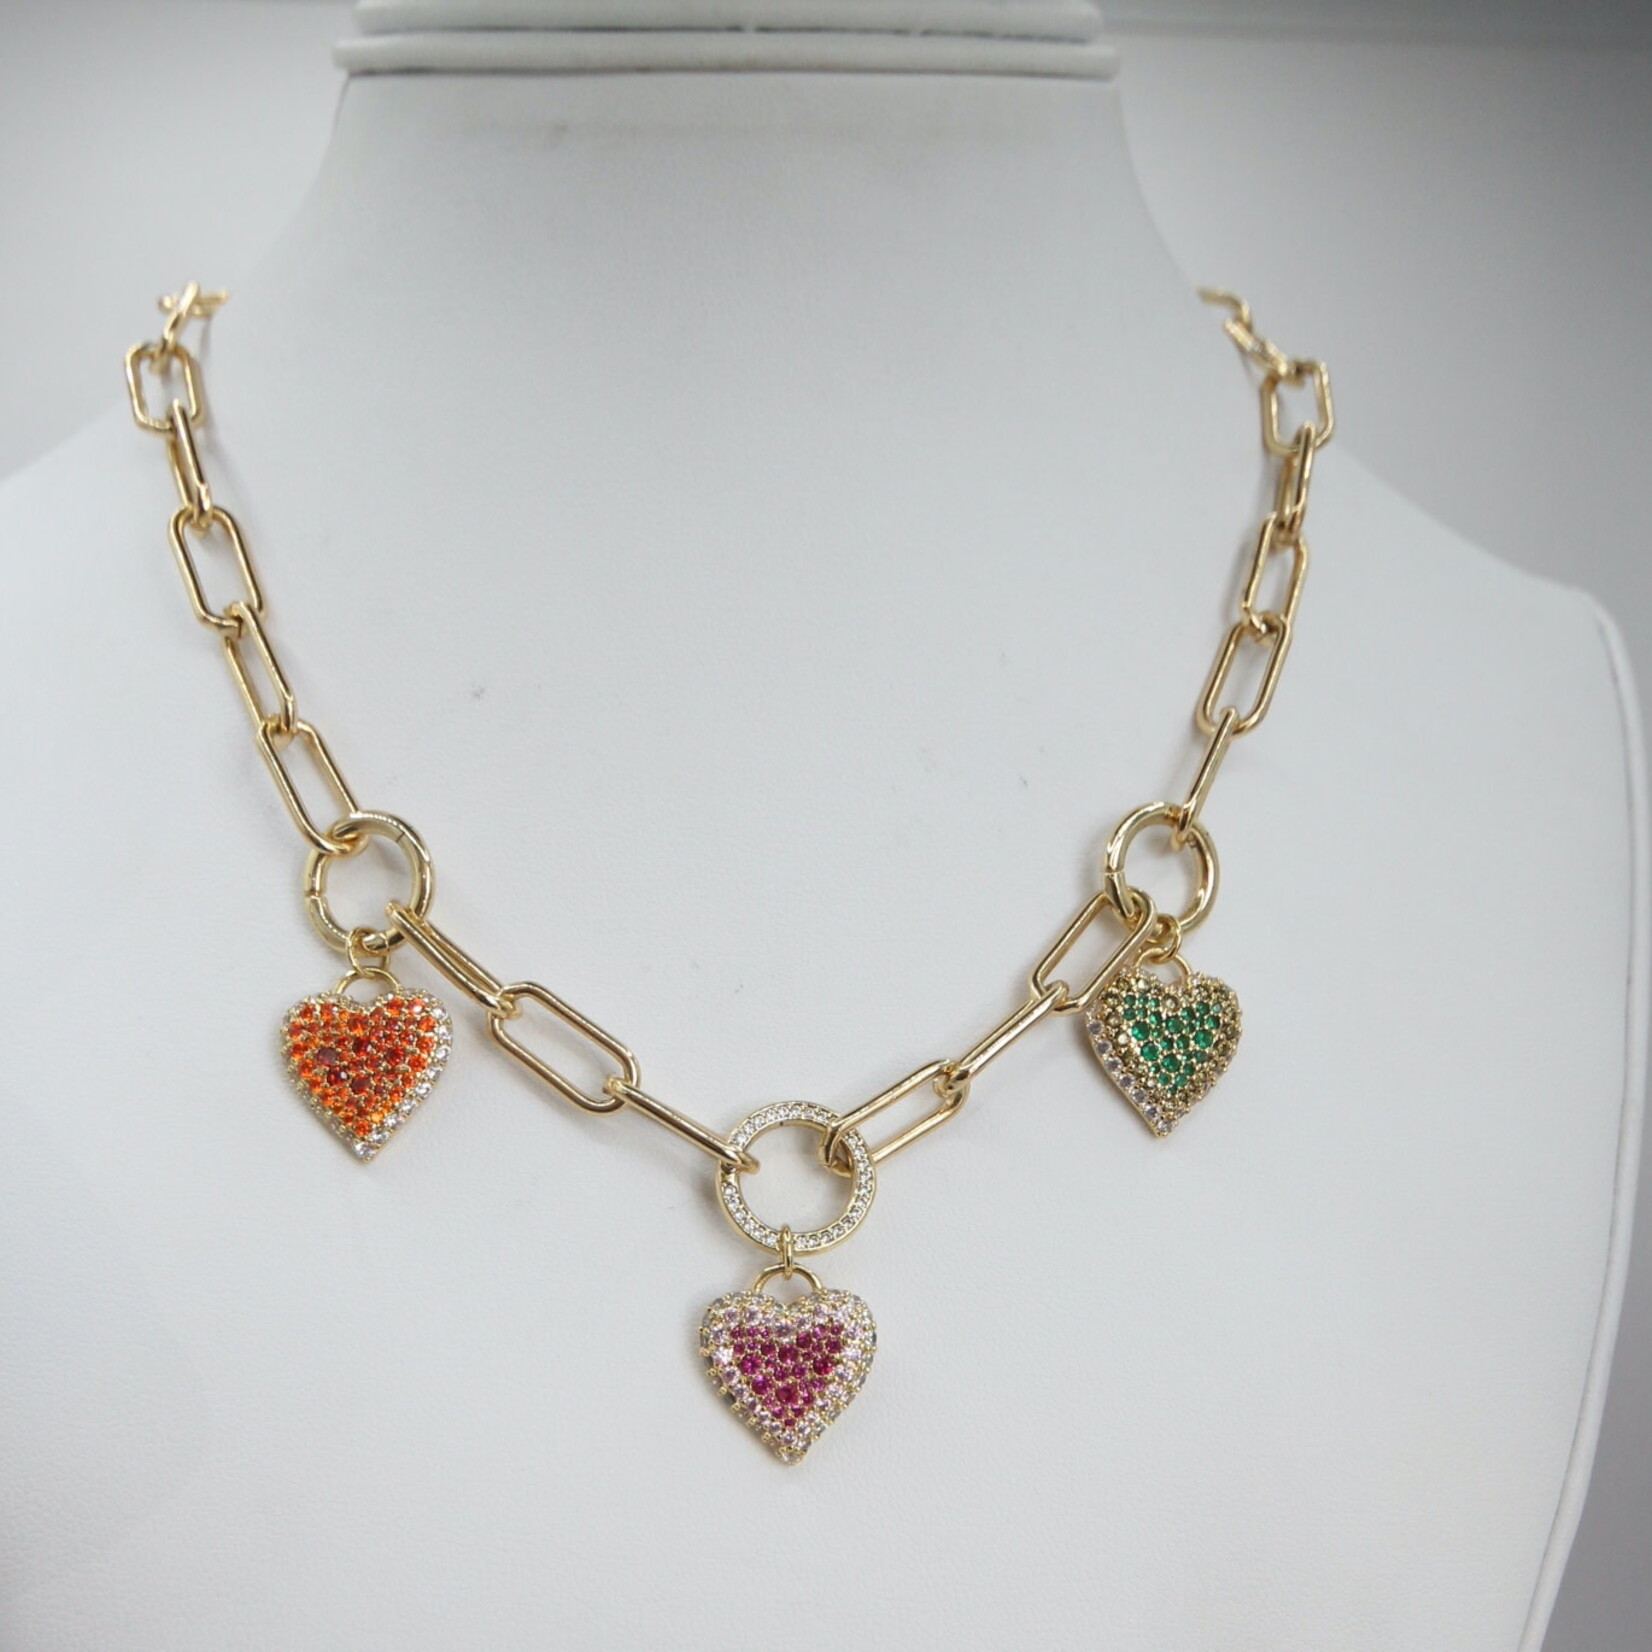 3 Heart Link Chain Gold Necklace